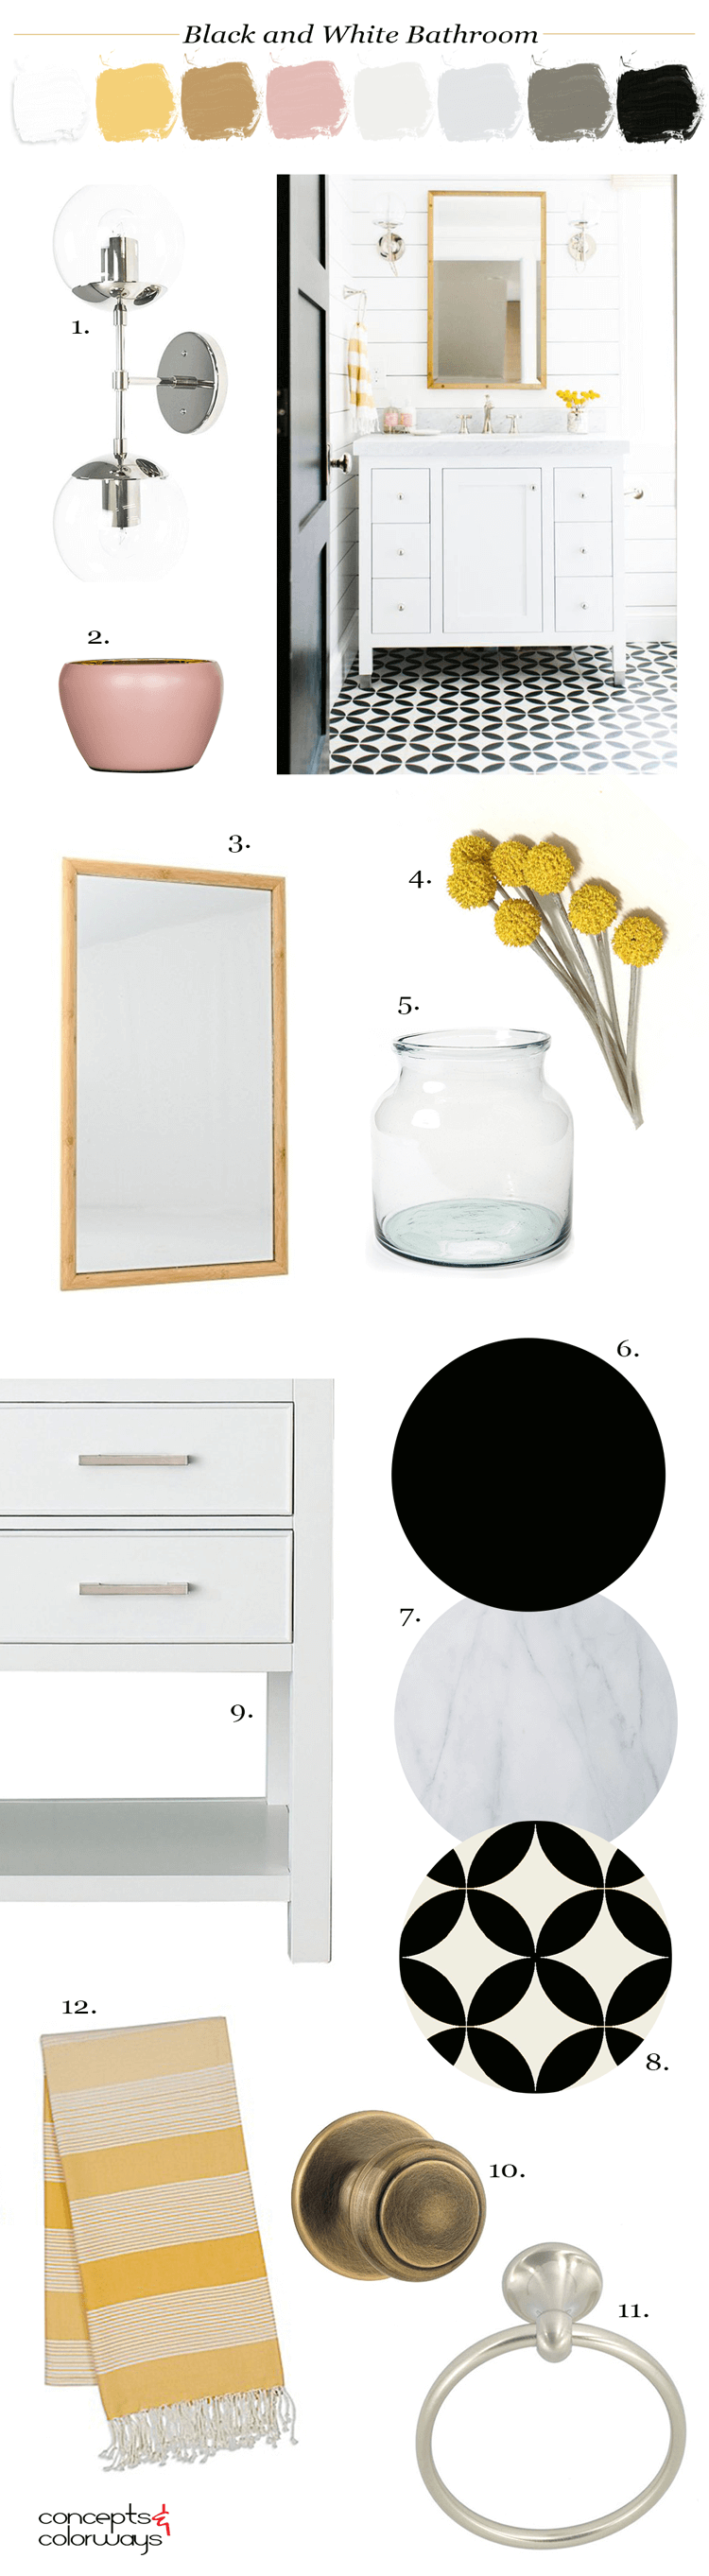 black and white bathroom, black and white tile, black door, pink and yellow, white marble, white shiplap, yellow flowers, white vanity cabinet, glass globe wall sconce, blush pink, bamboo mirror, yellow striped towels, towel ring, ochre, black and white, bright yellow